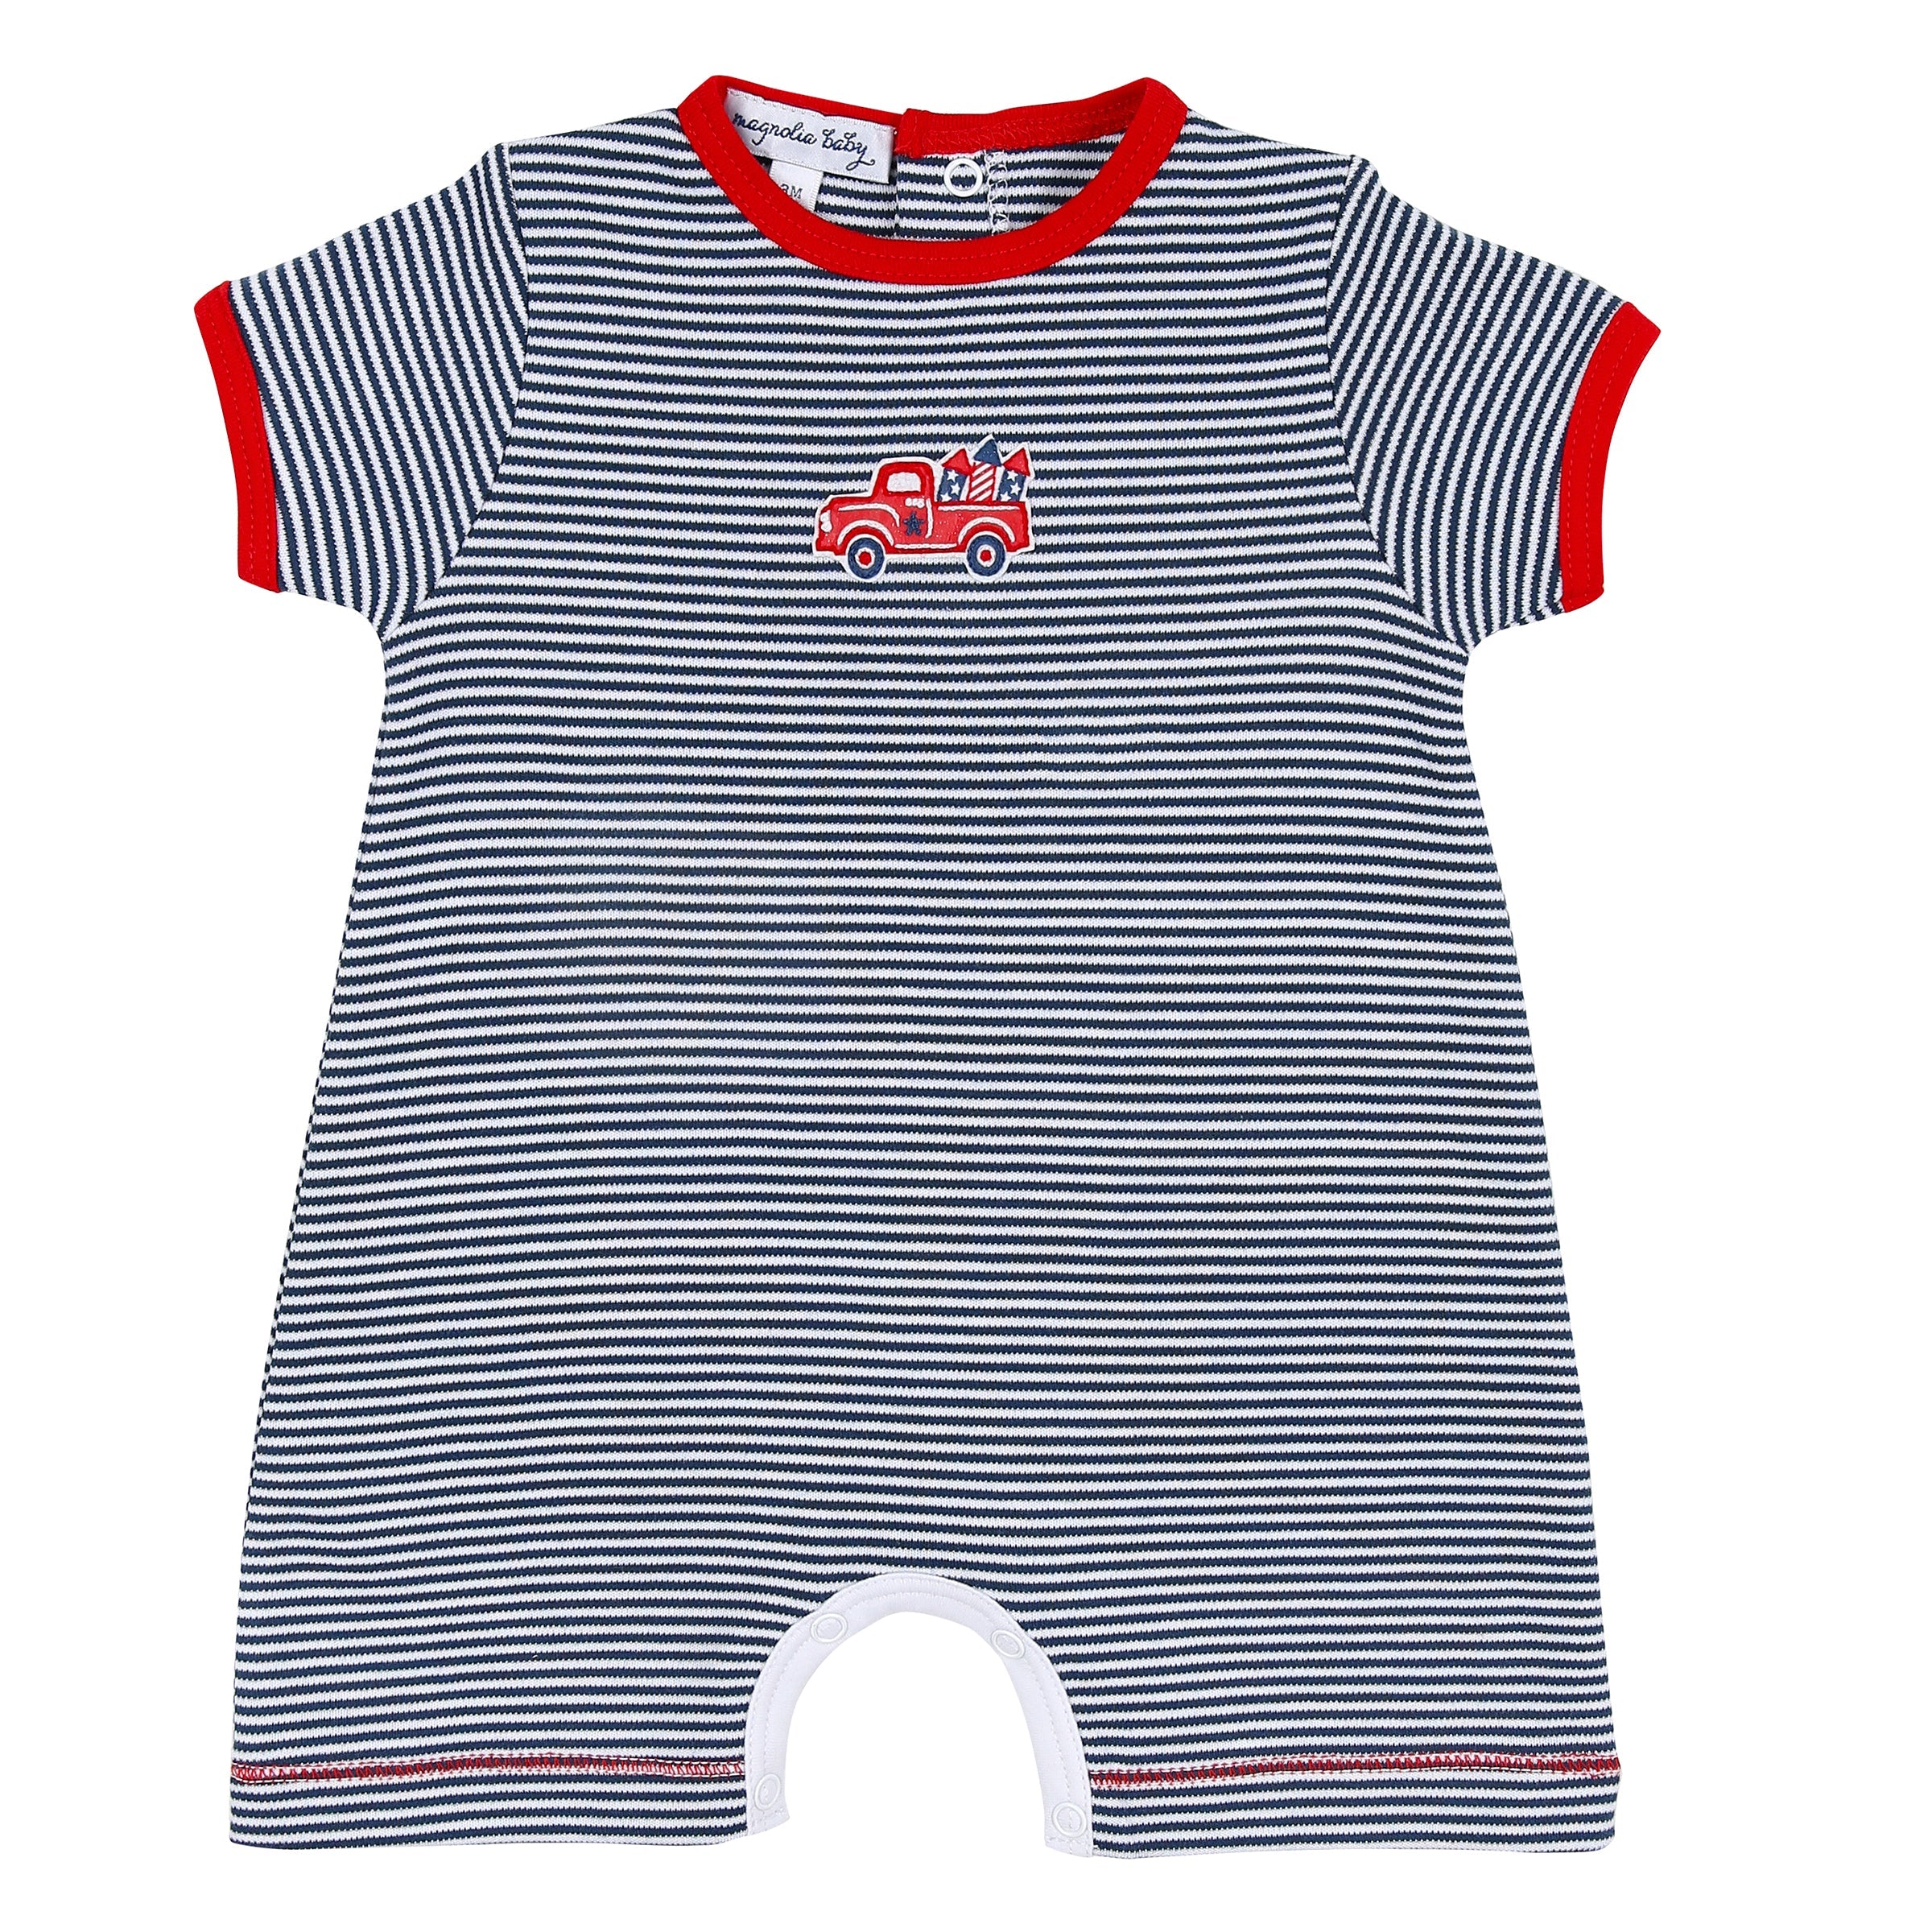 Magnolia Baby Red Stars and Stripes Forever Embroidered Short Playsuit